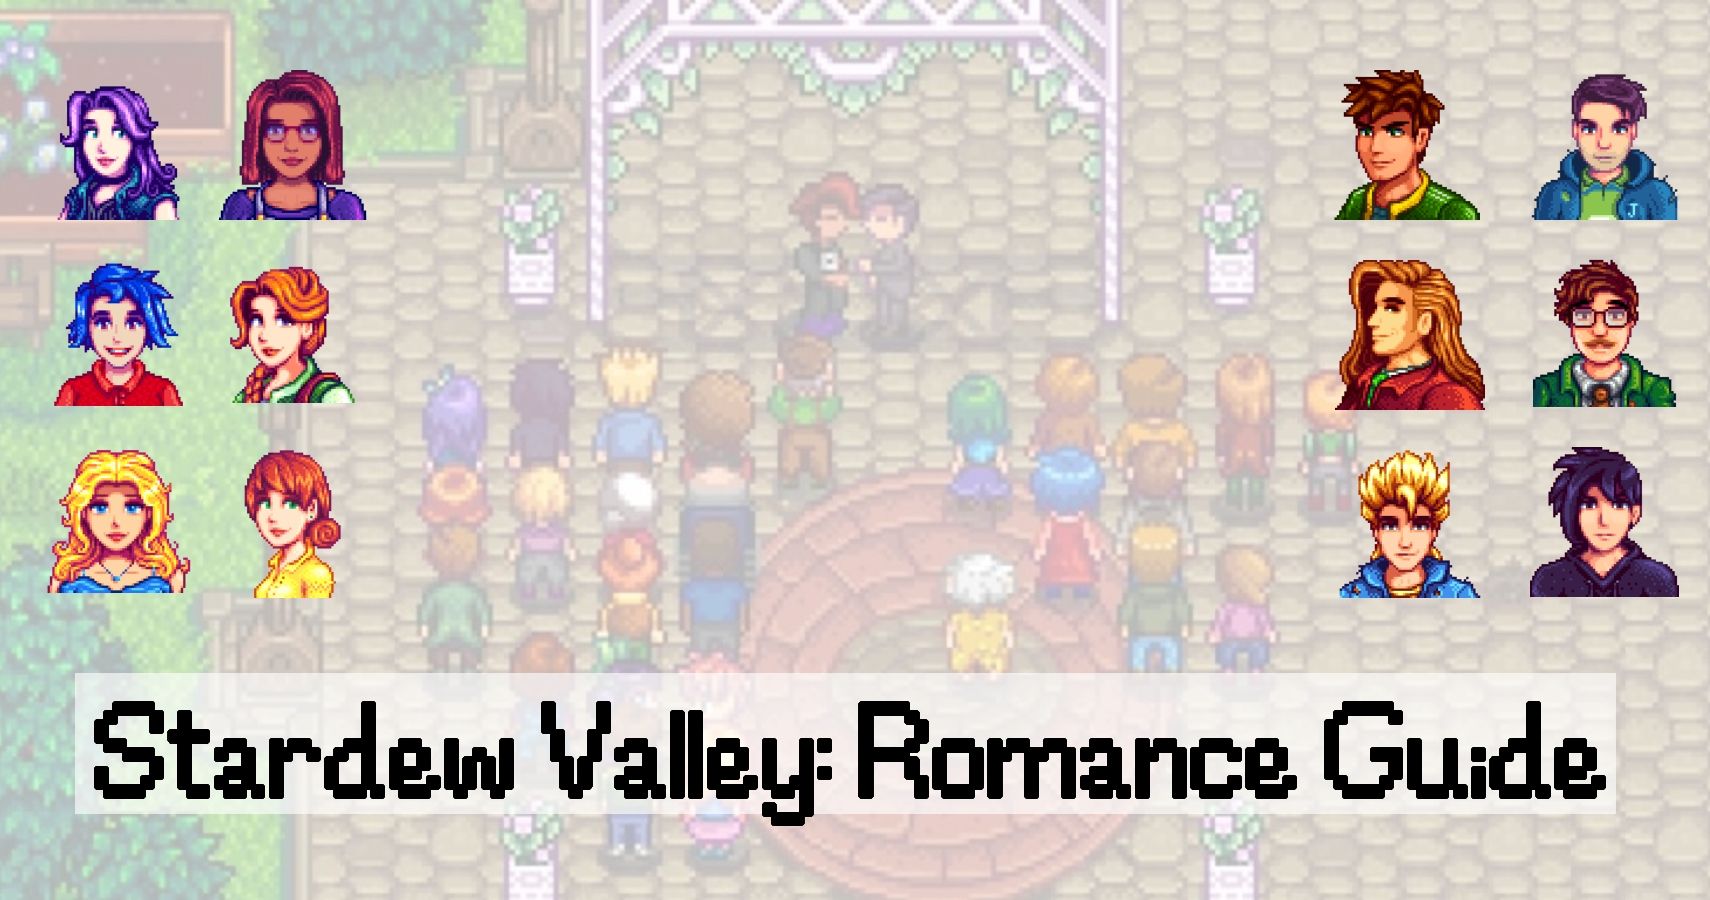 stardew valley romance guide lead image showing a wedding to shane and all of the marriage candidates on either side